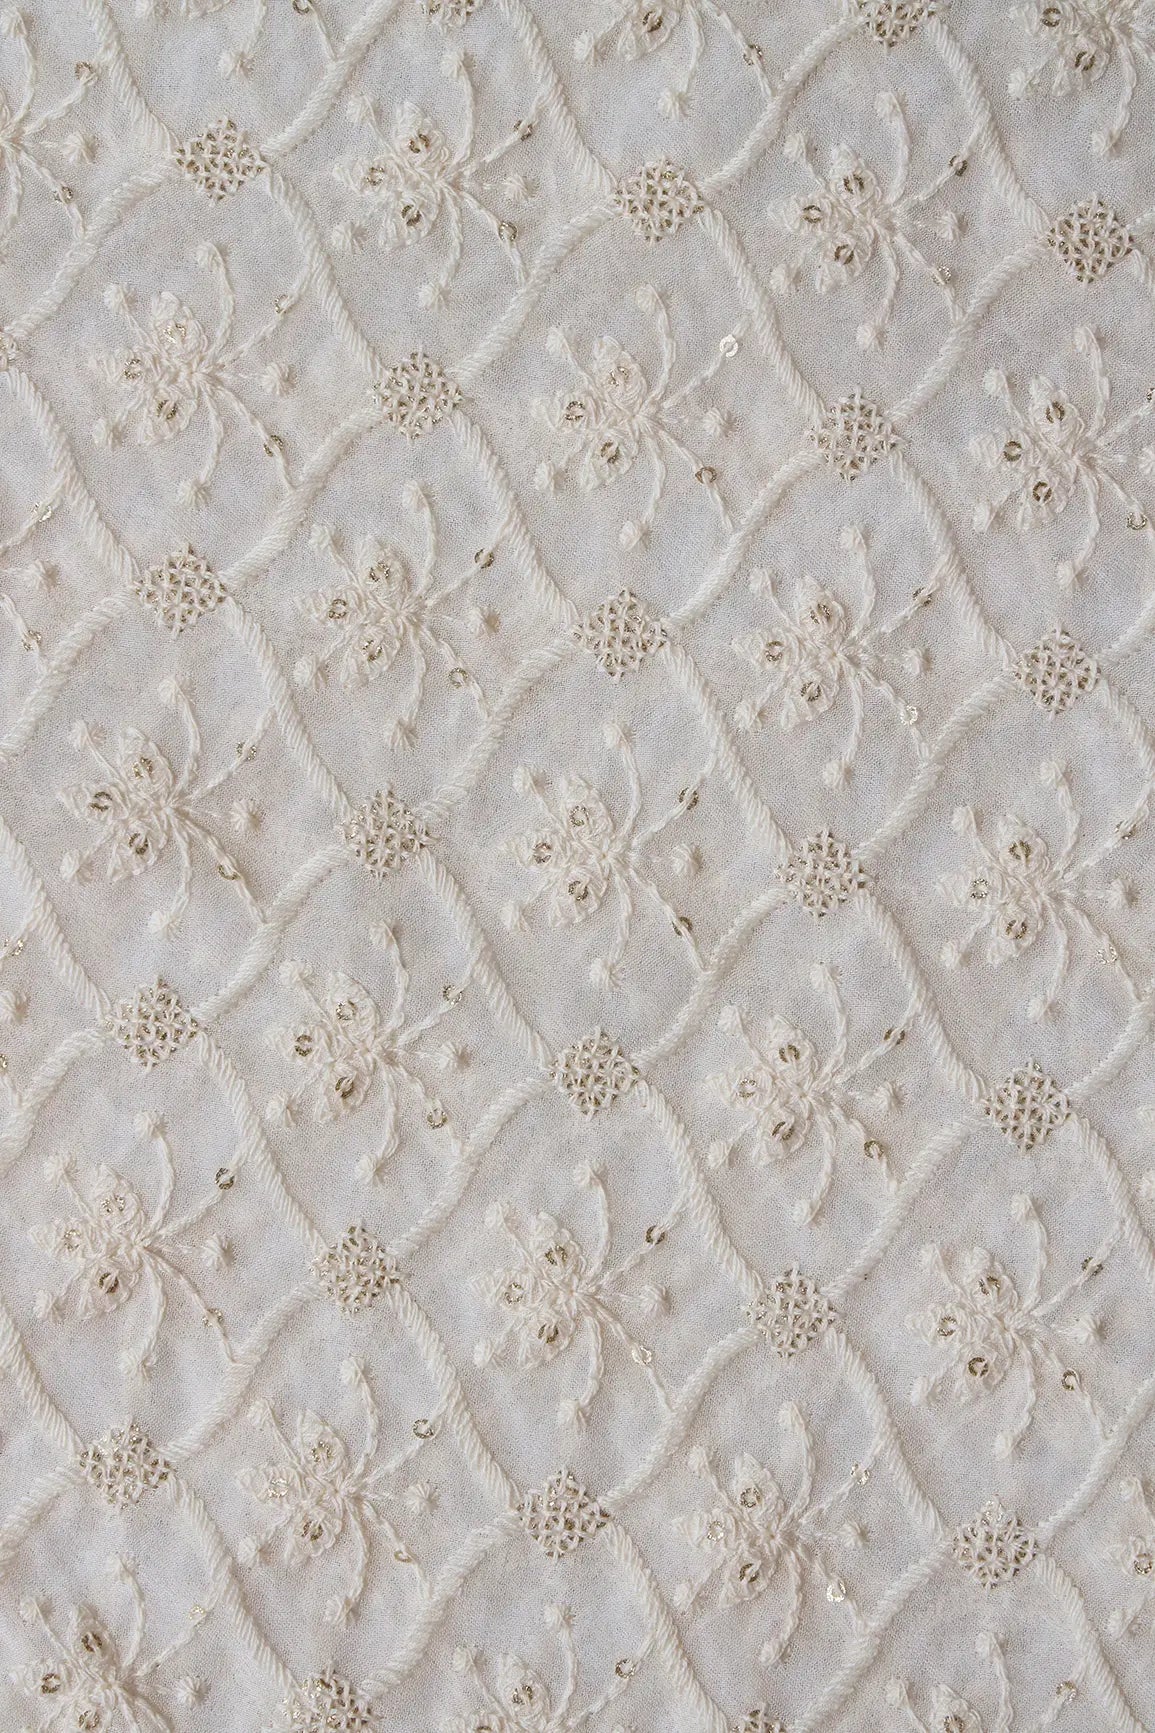 White Thread With Gold Glitter Sequins Trellis LucknowiEmbroidery On Dyeable Viscose Georgette Fabric - doeraa